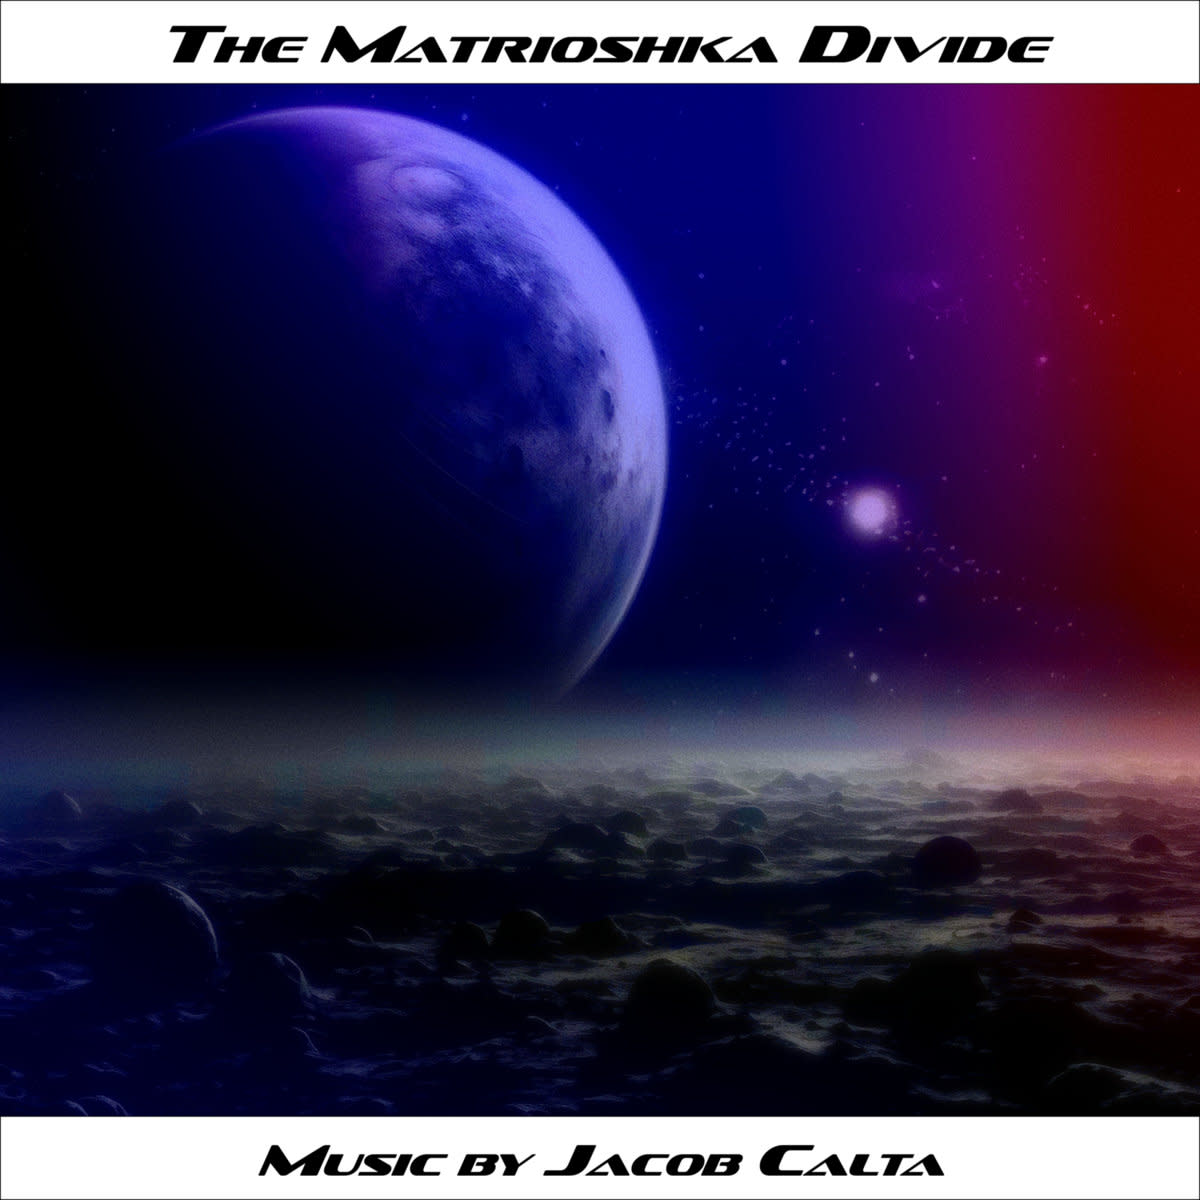 Synth Single Review: “The Matrioshka Divide”  by Jacob Calta